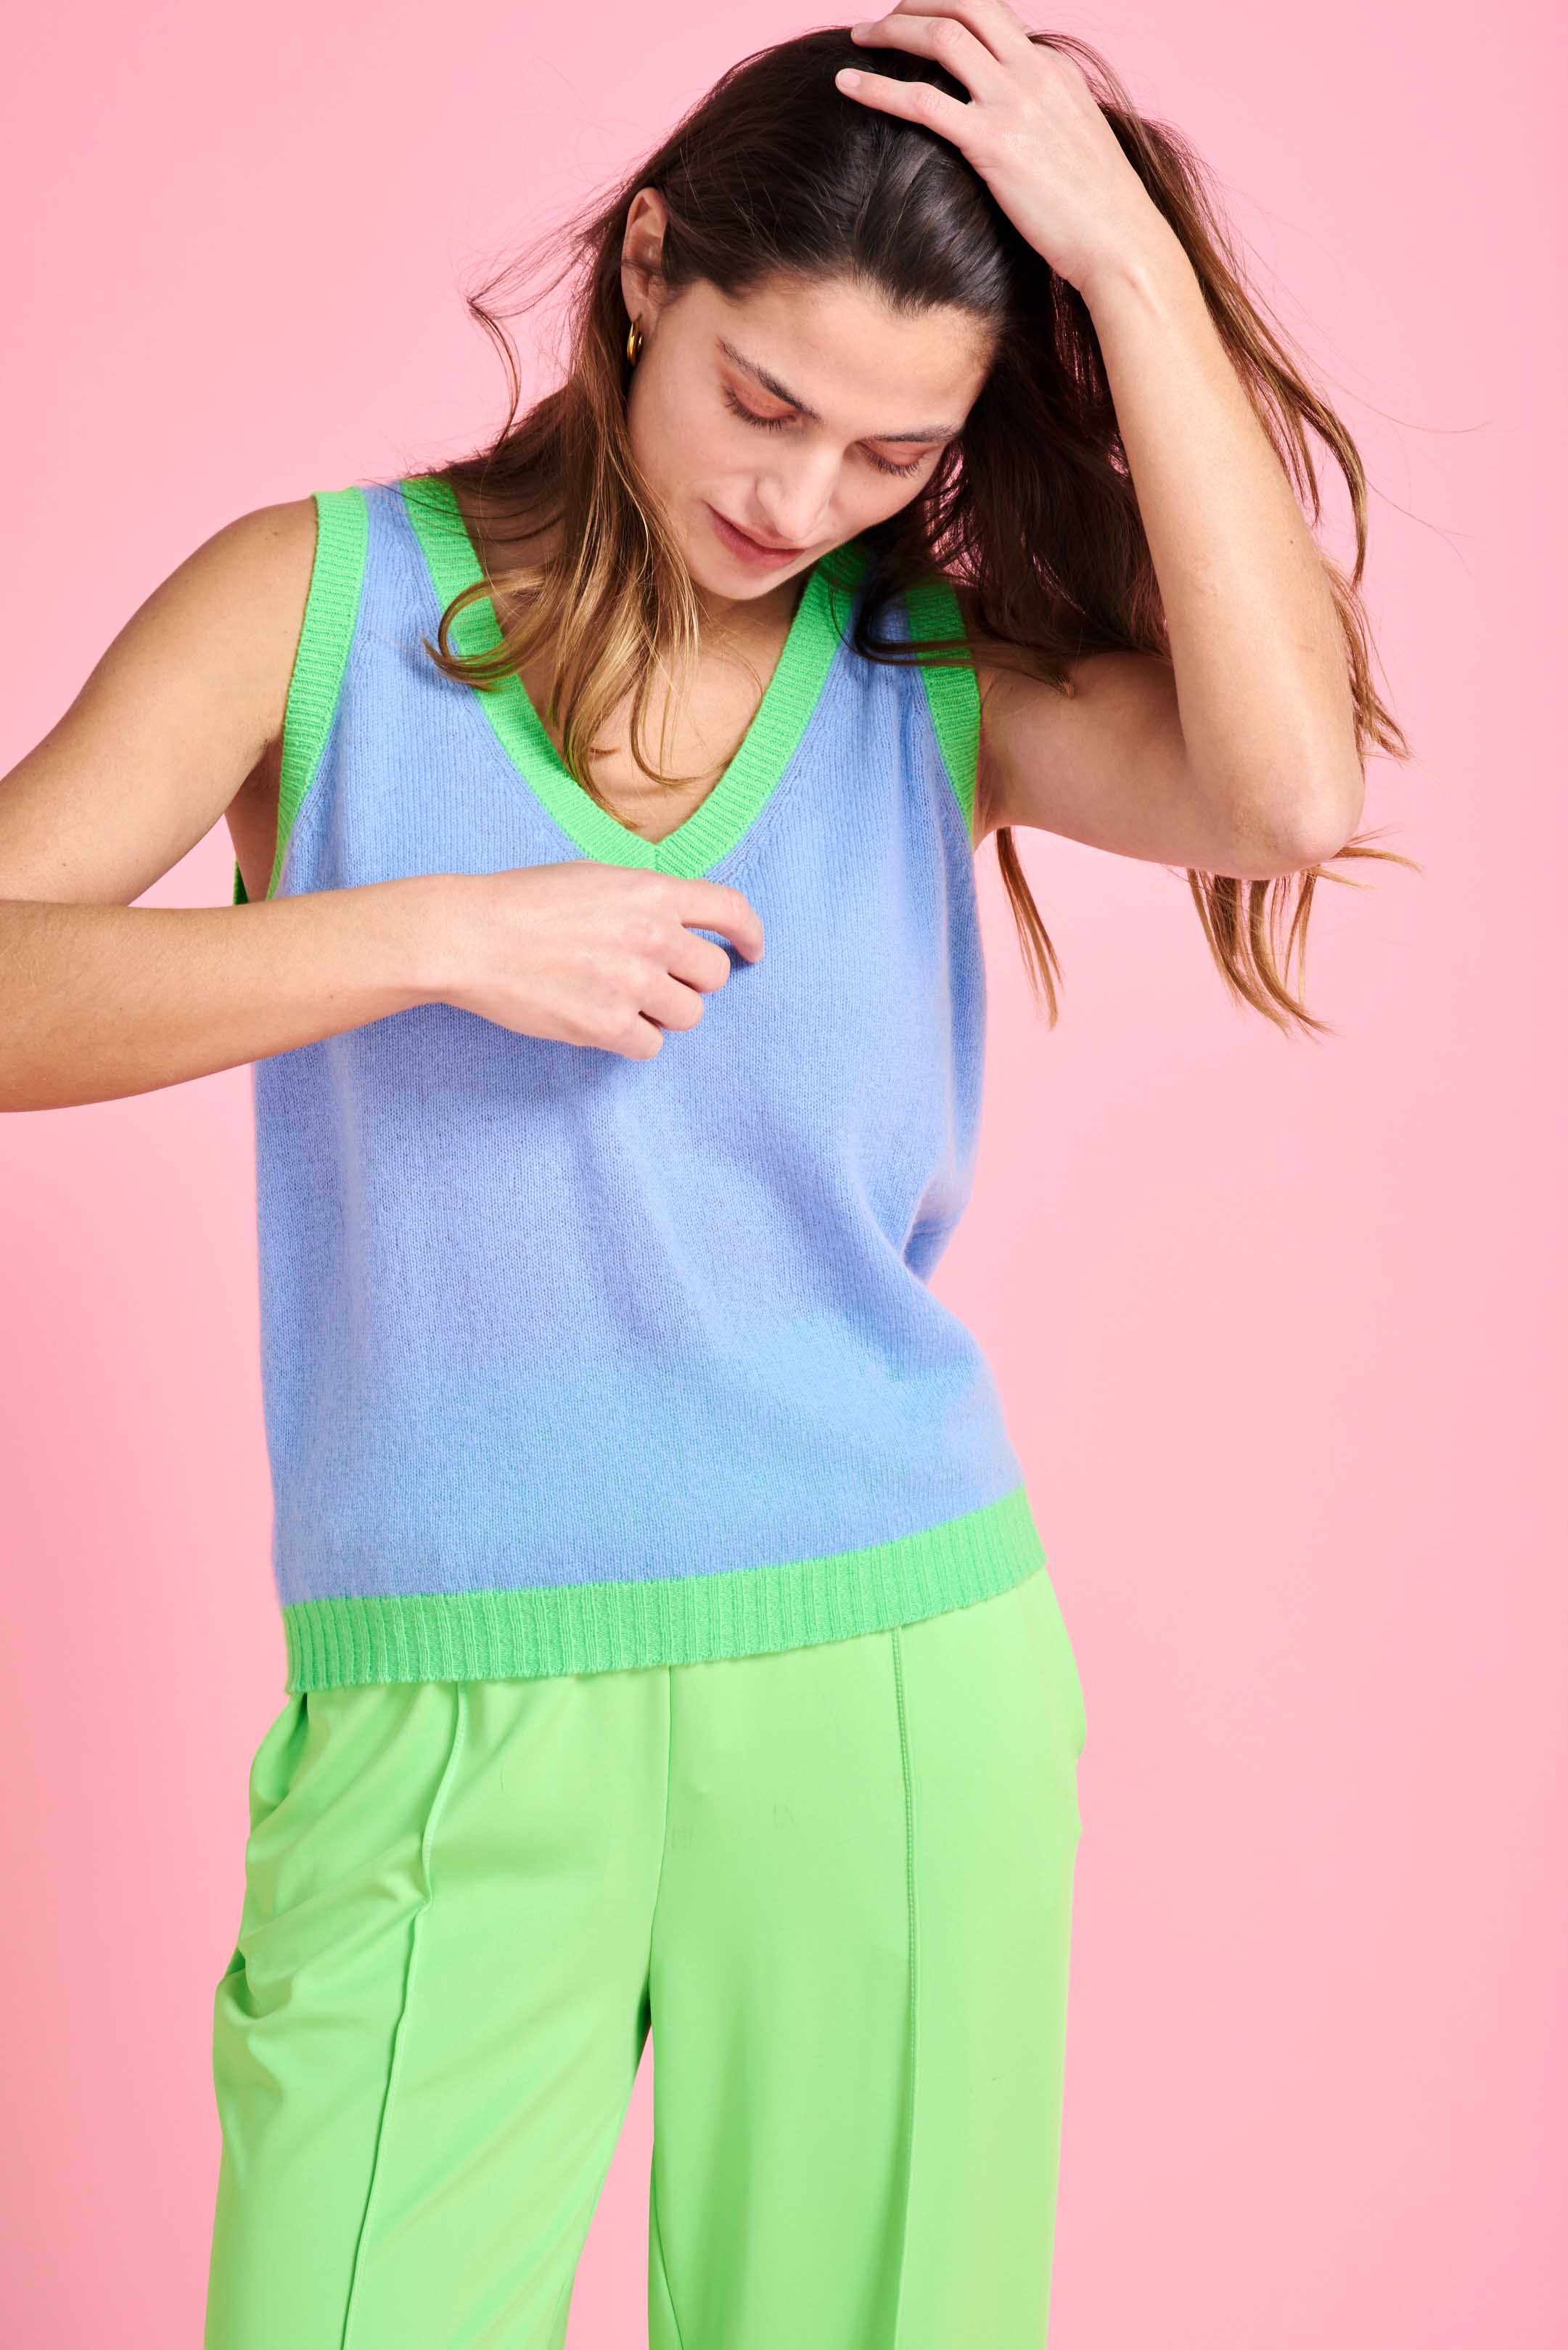 Brown haired female model wearing Jumper1234 Wedgewood blue cashmere vee neck tank with contrast neon green ribs 